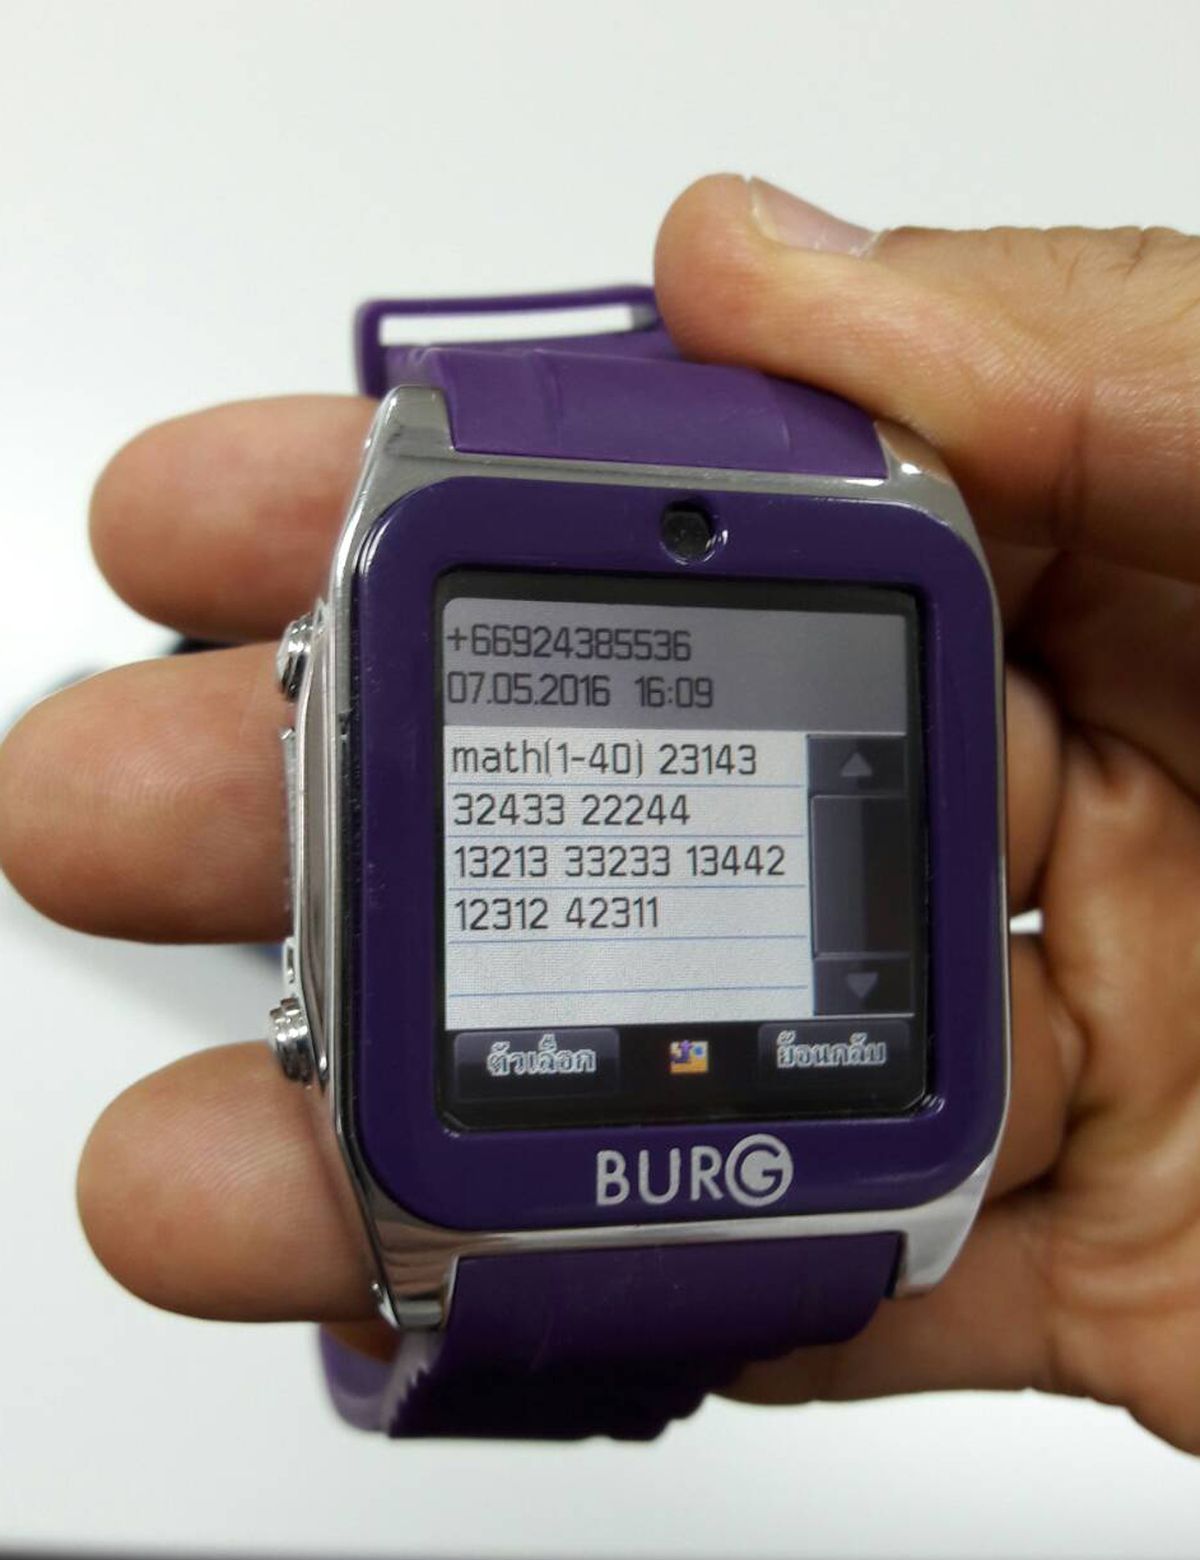 In this Saturday May 7, 2016 photo by Asst.Prof.Pakarat Jumpanoi, shows a smartwatch used by students caught cheating in exams for admission to medical and dental faculties in Bangkok, Thailand. Glasses with embedded cameras and smartwatches with stored information seem like regular spy equipment for the likes of James Bond, but to three students applying to medical school in Thailand, they were high-technology cheating devices.(Asst.Prof.Pakarat Jumpanoi/Rangsit University via AP) (AP)